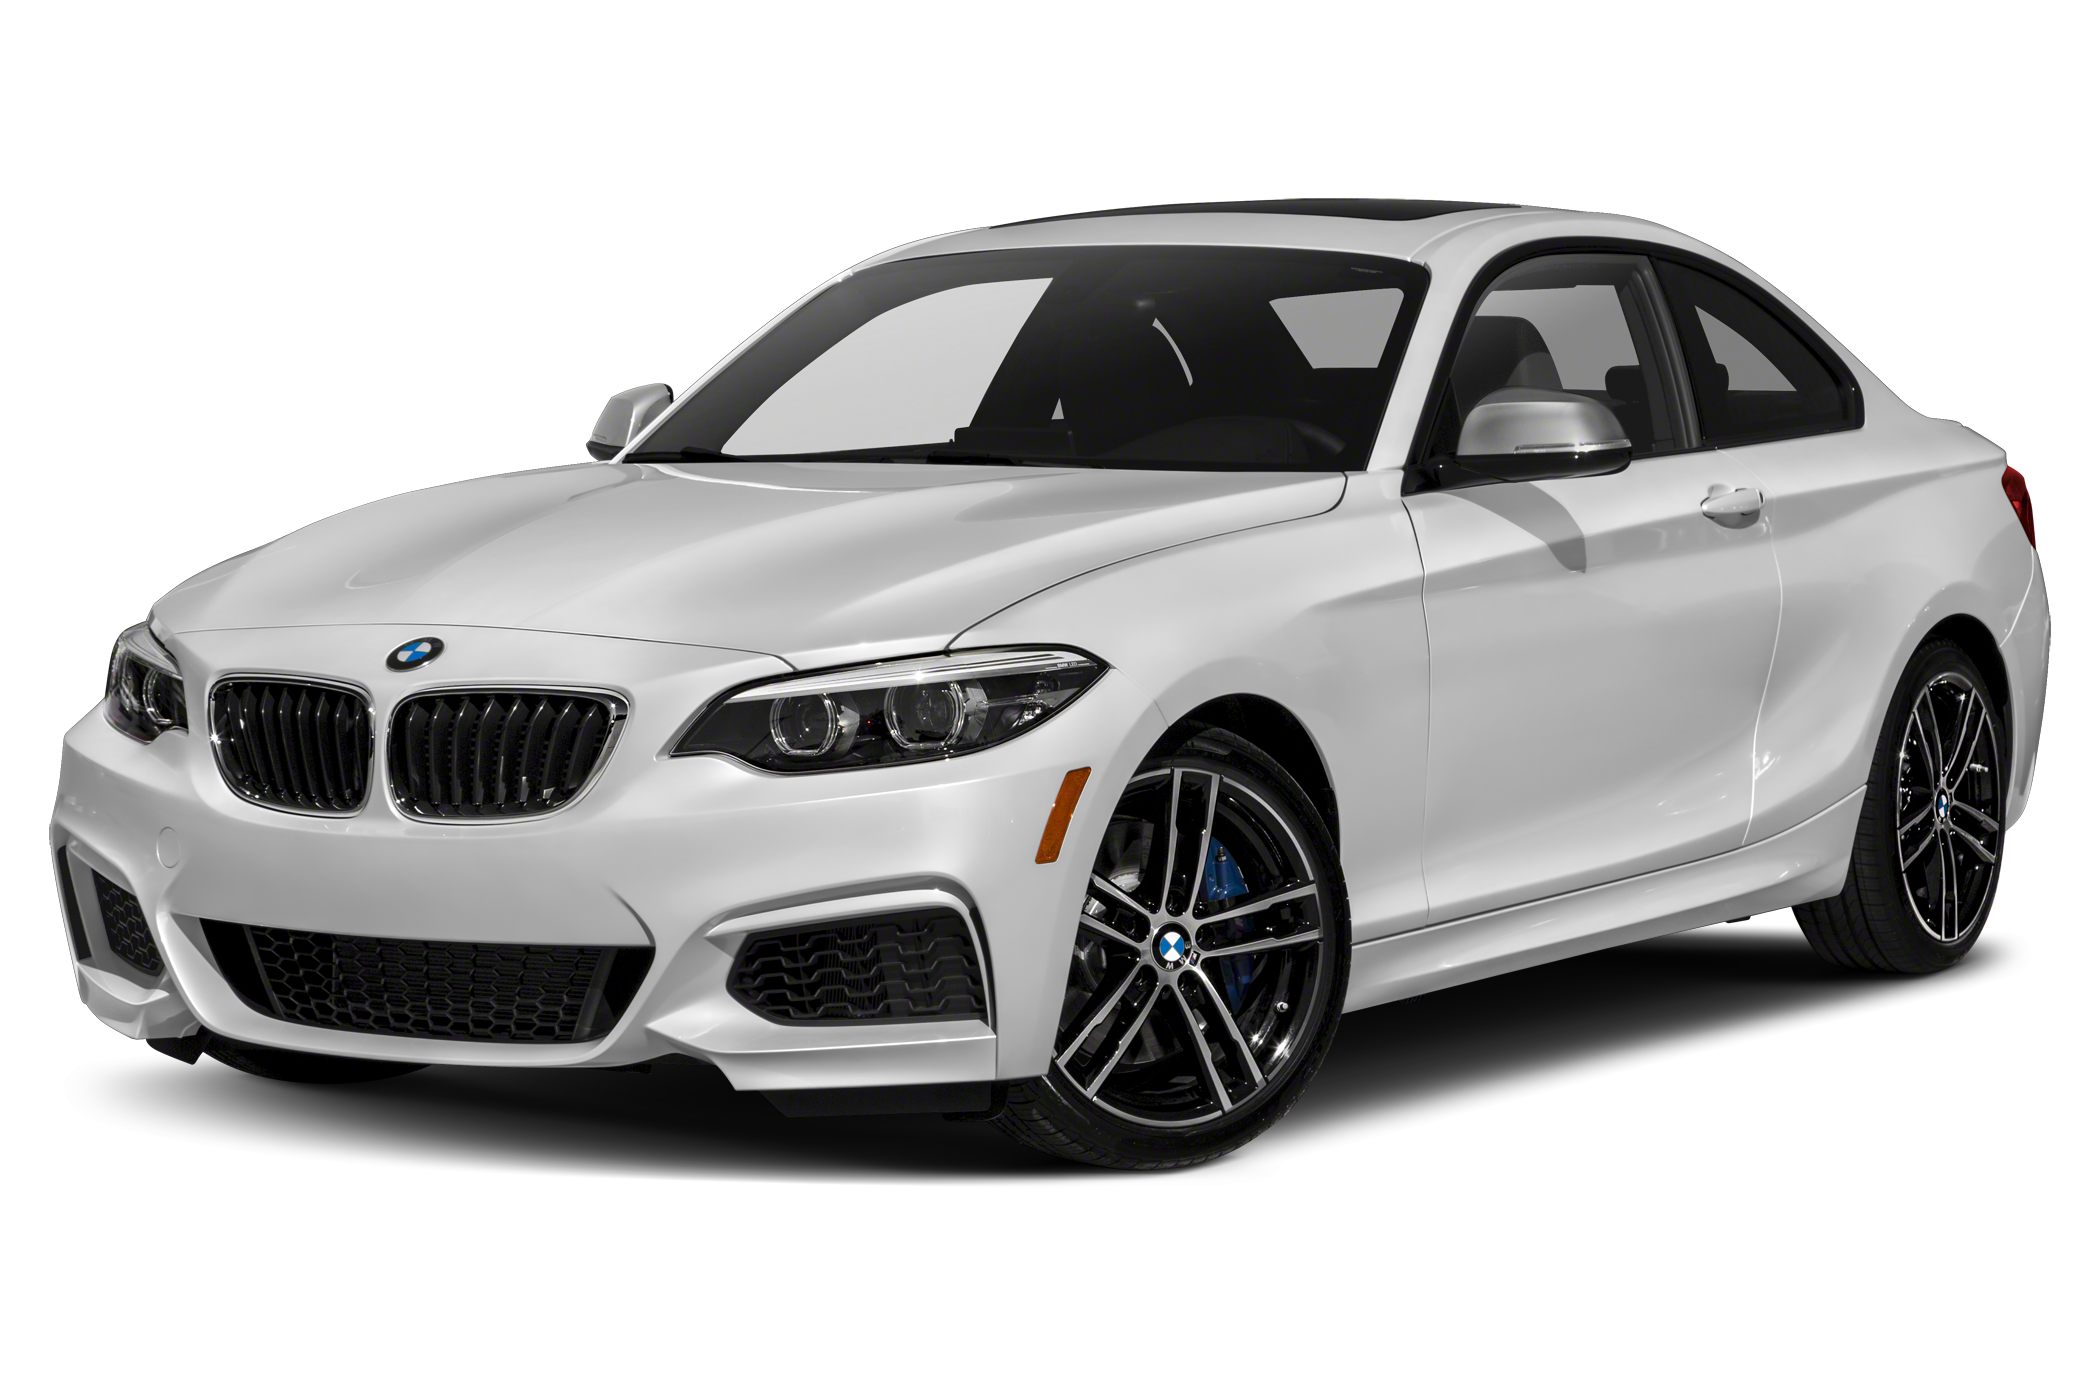 Bmw M240Ix Specs Bmw M240i Xdrive Review 335bhp Awd Coupe Tested Top